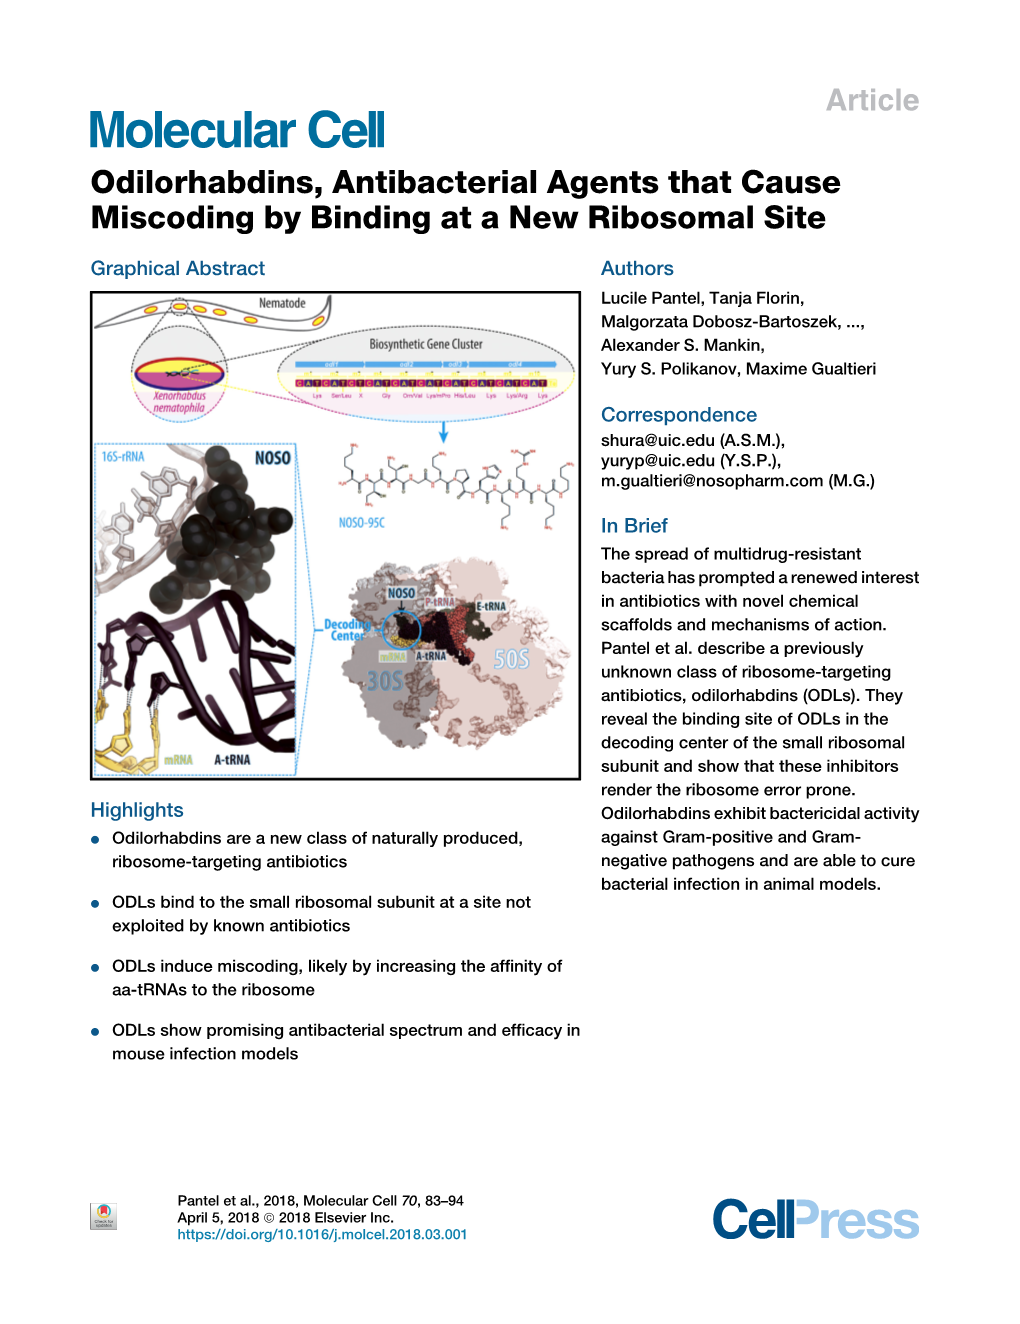 Odilorhabdins, Antibacterial Agents That Cause Miscoding by Binding at a New Ribosomal Site